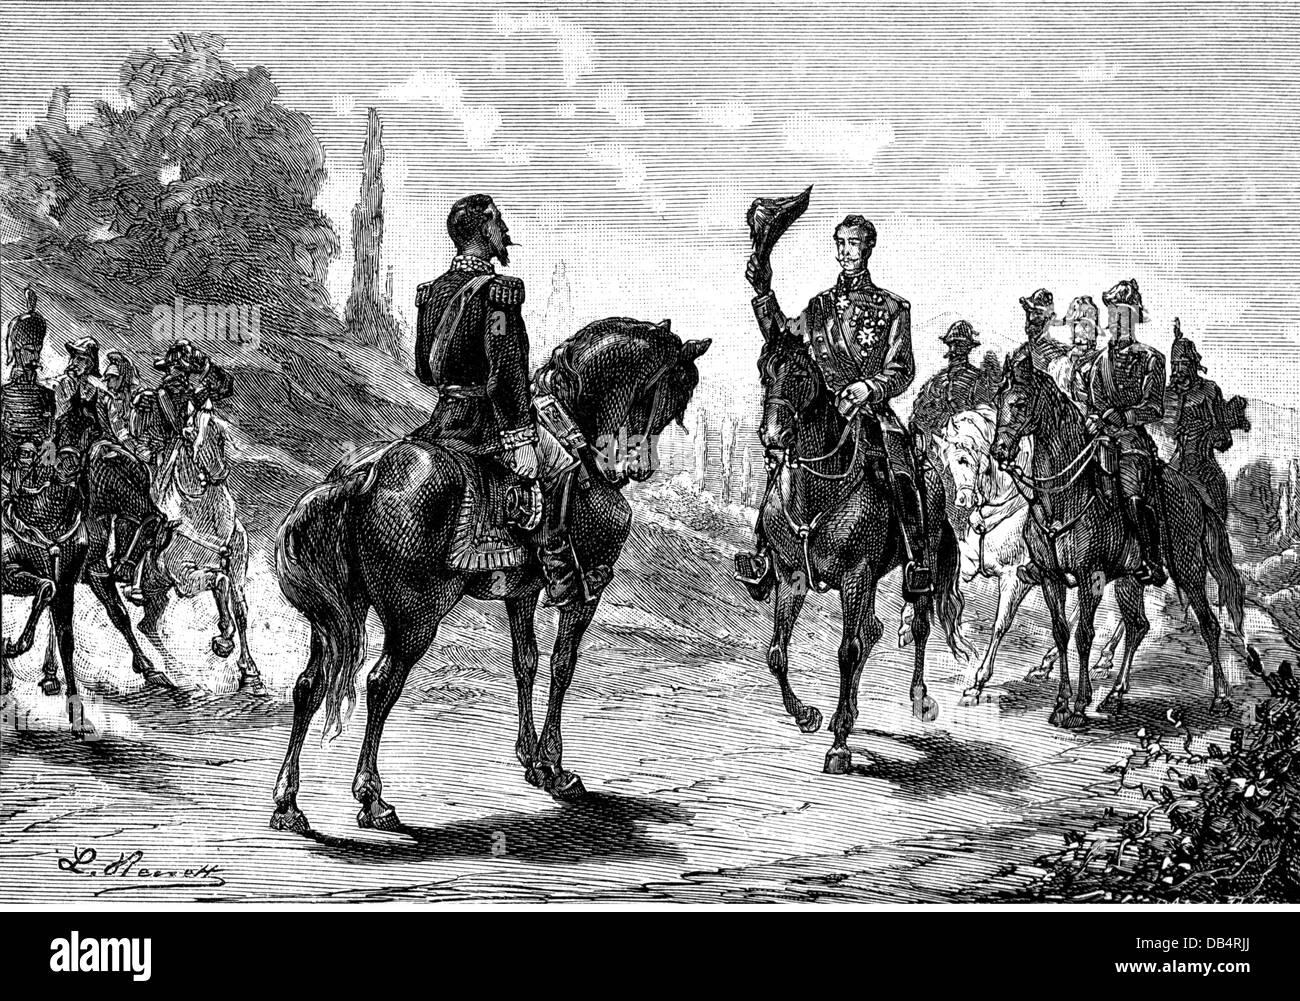 Sardinian War 1859, meeting between Emperor Napoleon III of France and Emperor Franz Joseph I of Austria at Villafranca, 11.7.1859, wood engraving, 19th century, Second Italian War of Independence, Italy, Bonaparte, Habsburg Lorraine, Habsburg-Lorraine, Unification Wars, Risorgimento, negotiations, preliminary quietude, armistice, Second Empire, empire Austria, war, wars, meeting, meetings, emperor, emperors, historic, historical, Francis, people, Additional-Rights-Clearences-Not Available Stock Photo